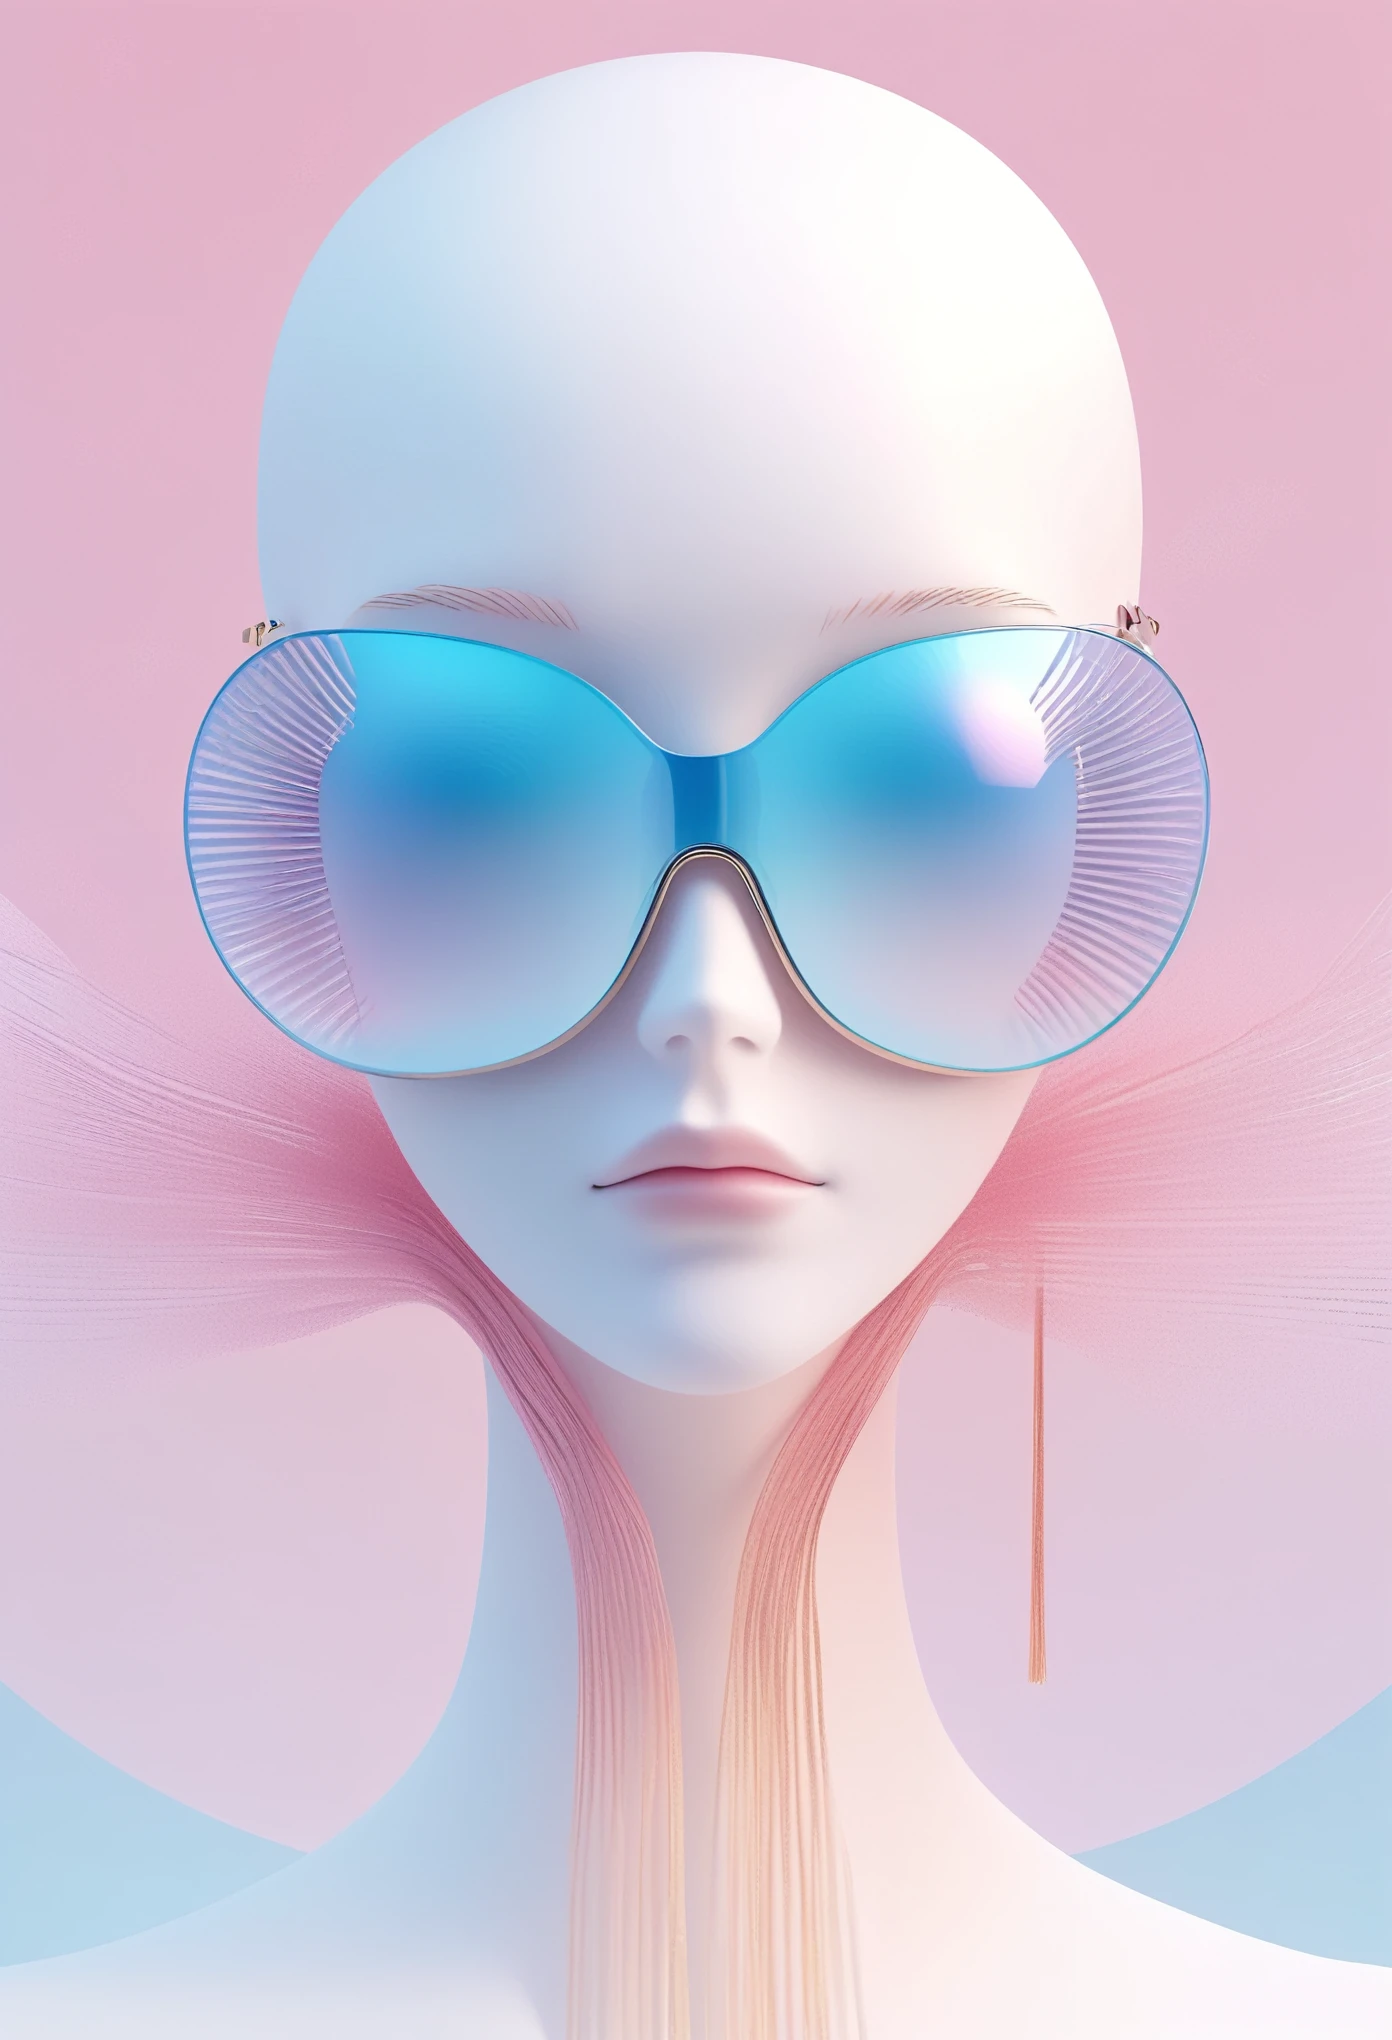 3D illustration of upper body and face of artificial intelligence model wearing futuristic glasses, Stylish glasses with tassels，Gradient background, Pastel color palette, pink blue, Simplicity, cold metallic textures, Surrealism,